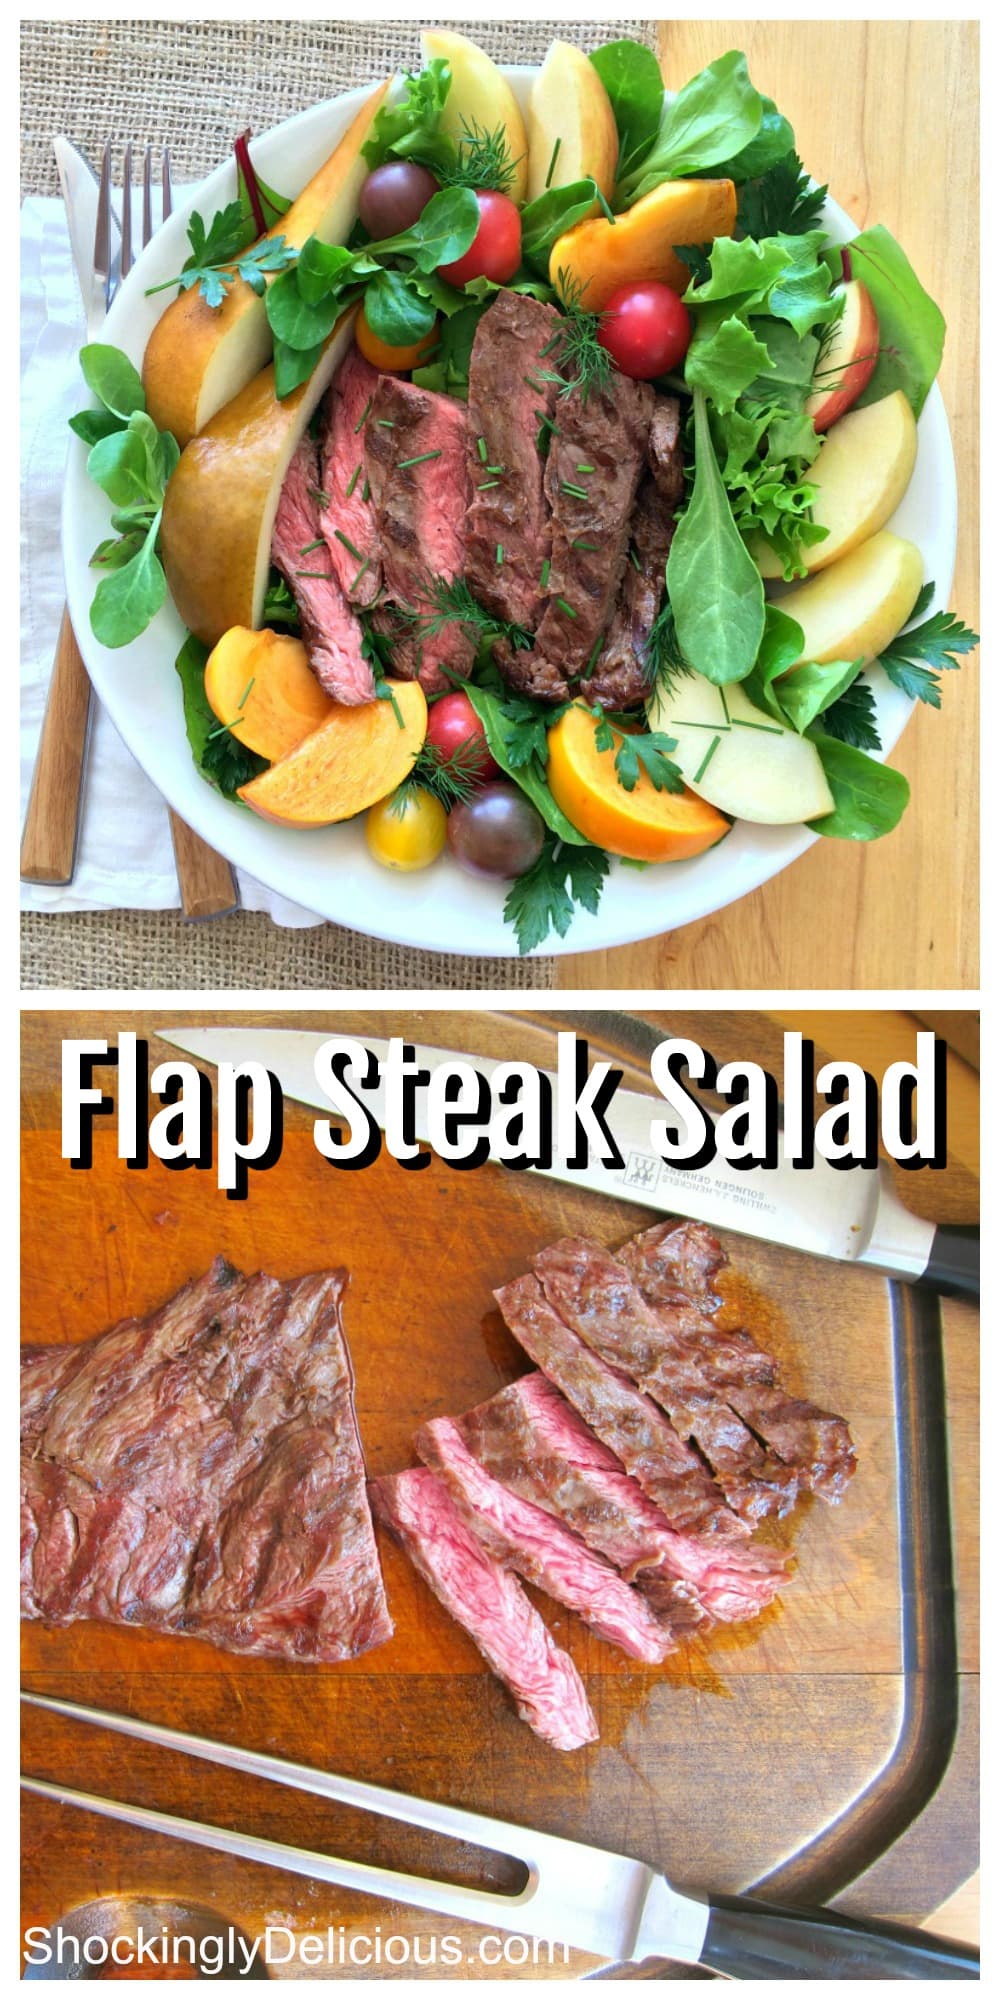 Photo collage of steak salad and grilled steak on a cutting board